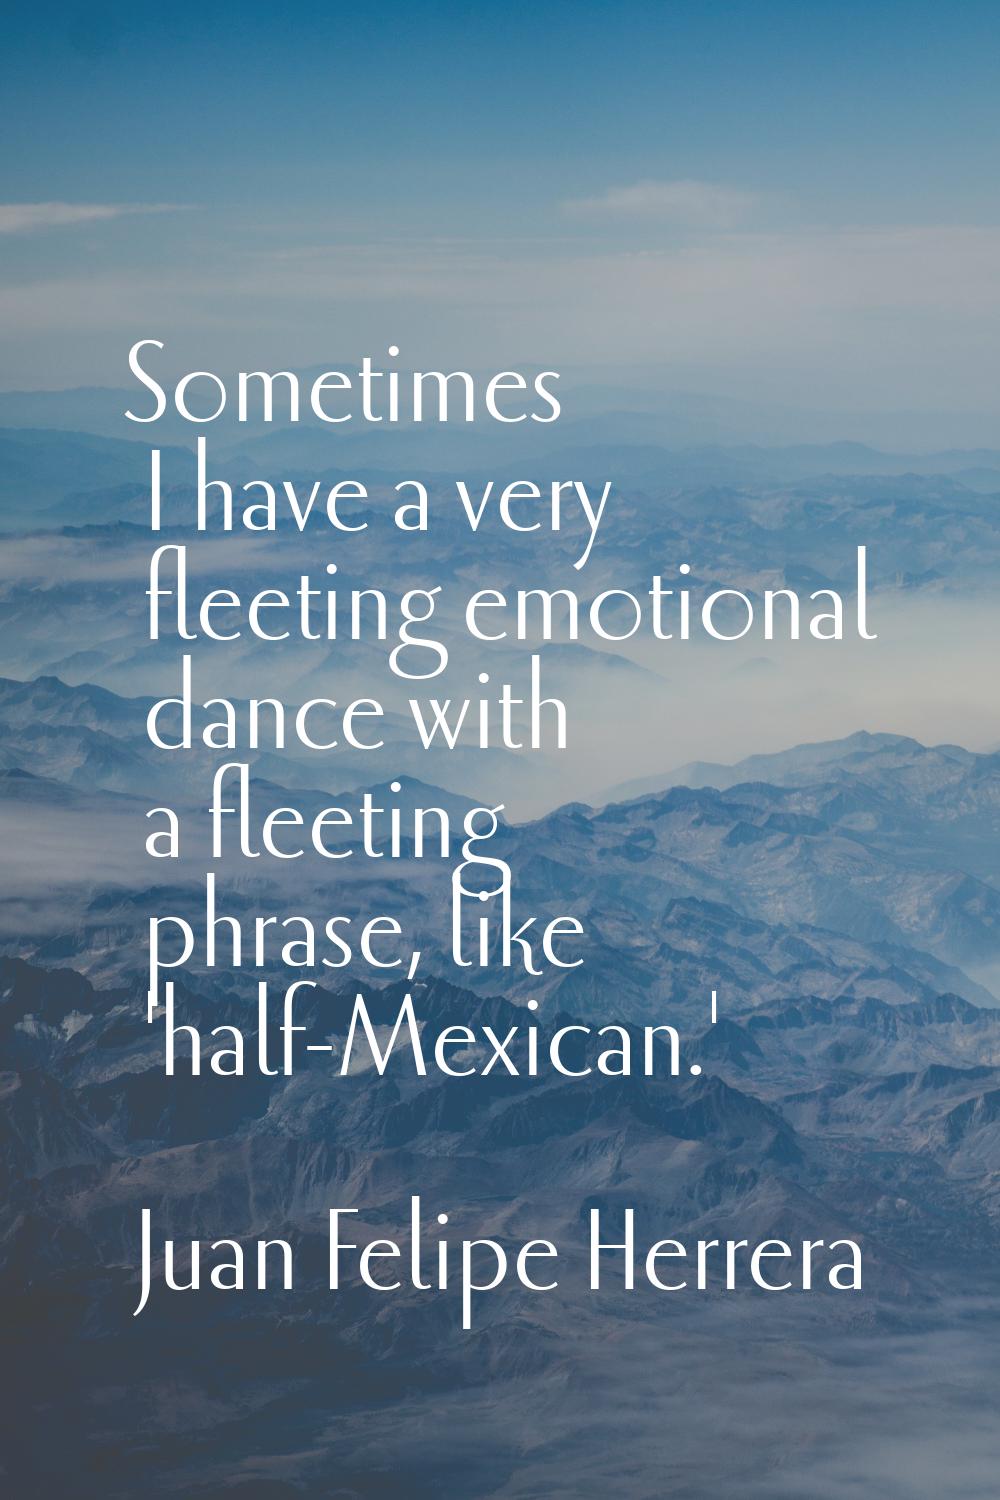 Sometimes I have a very fleeting emotional dance with a fleeting phrase, like 'half-Mexican.'